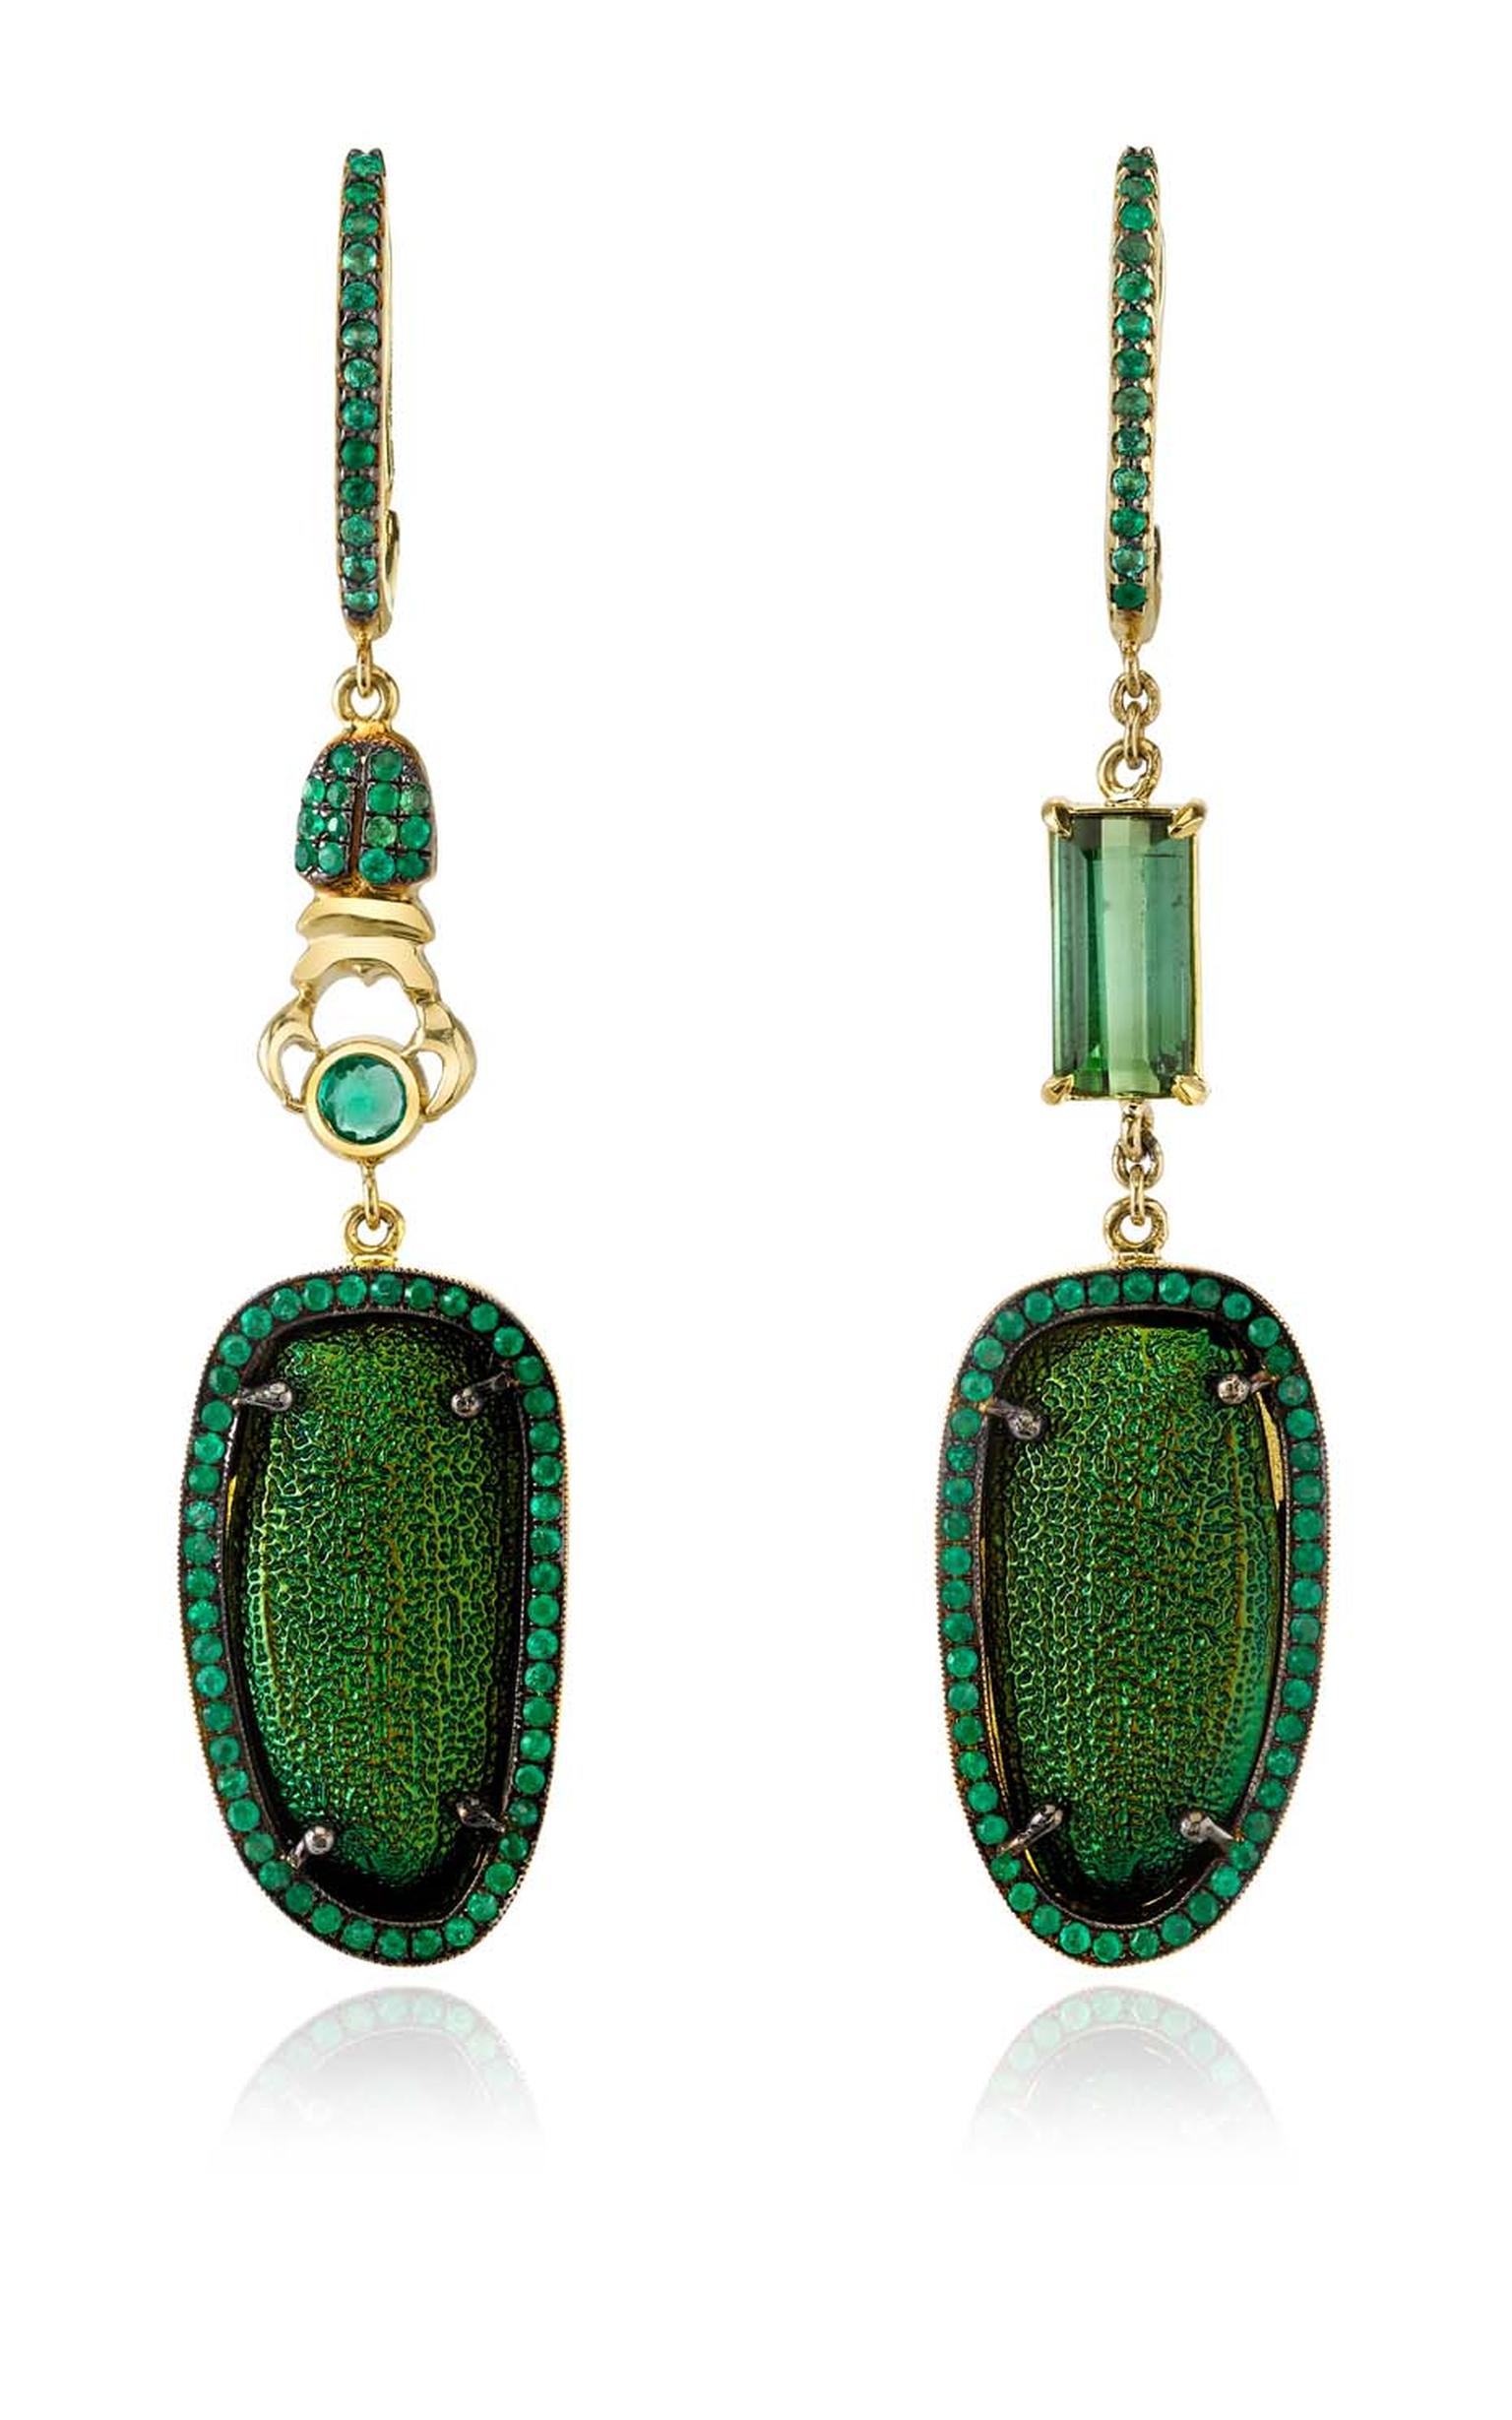 Daniela Villegas Emerald City earrings with slightly mismatched emeralds ($15,500).